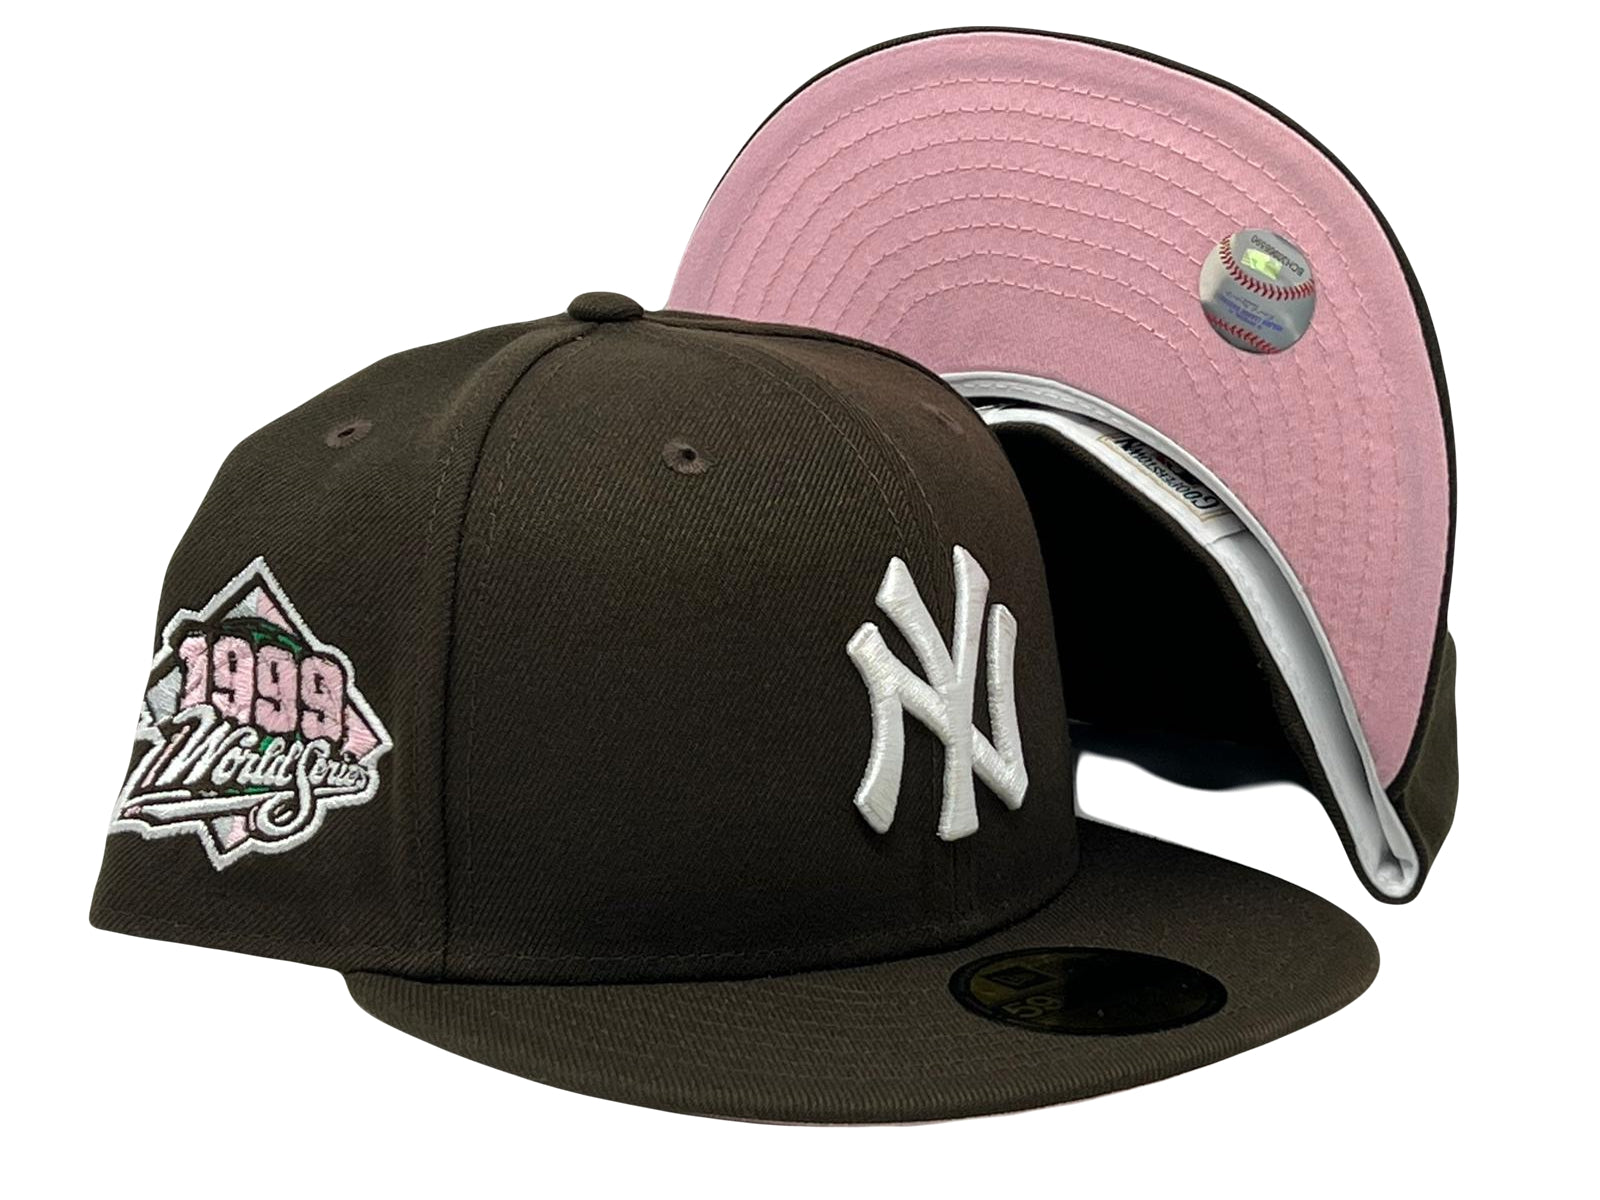 New York Yankees Brown Fitted Hat with Pink Brim in size 7 3/8 Myfitteds  HATCLUB